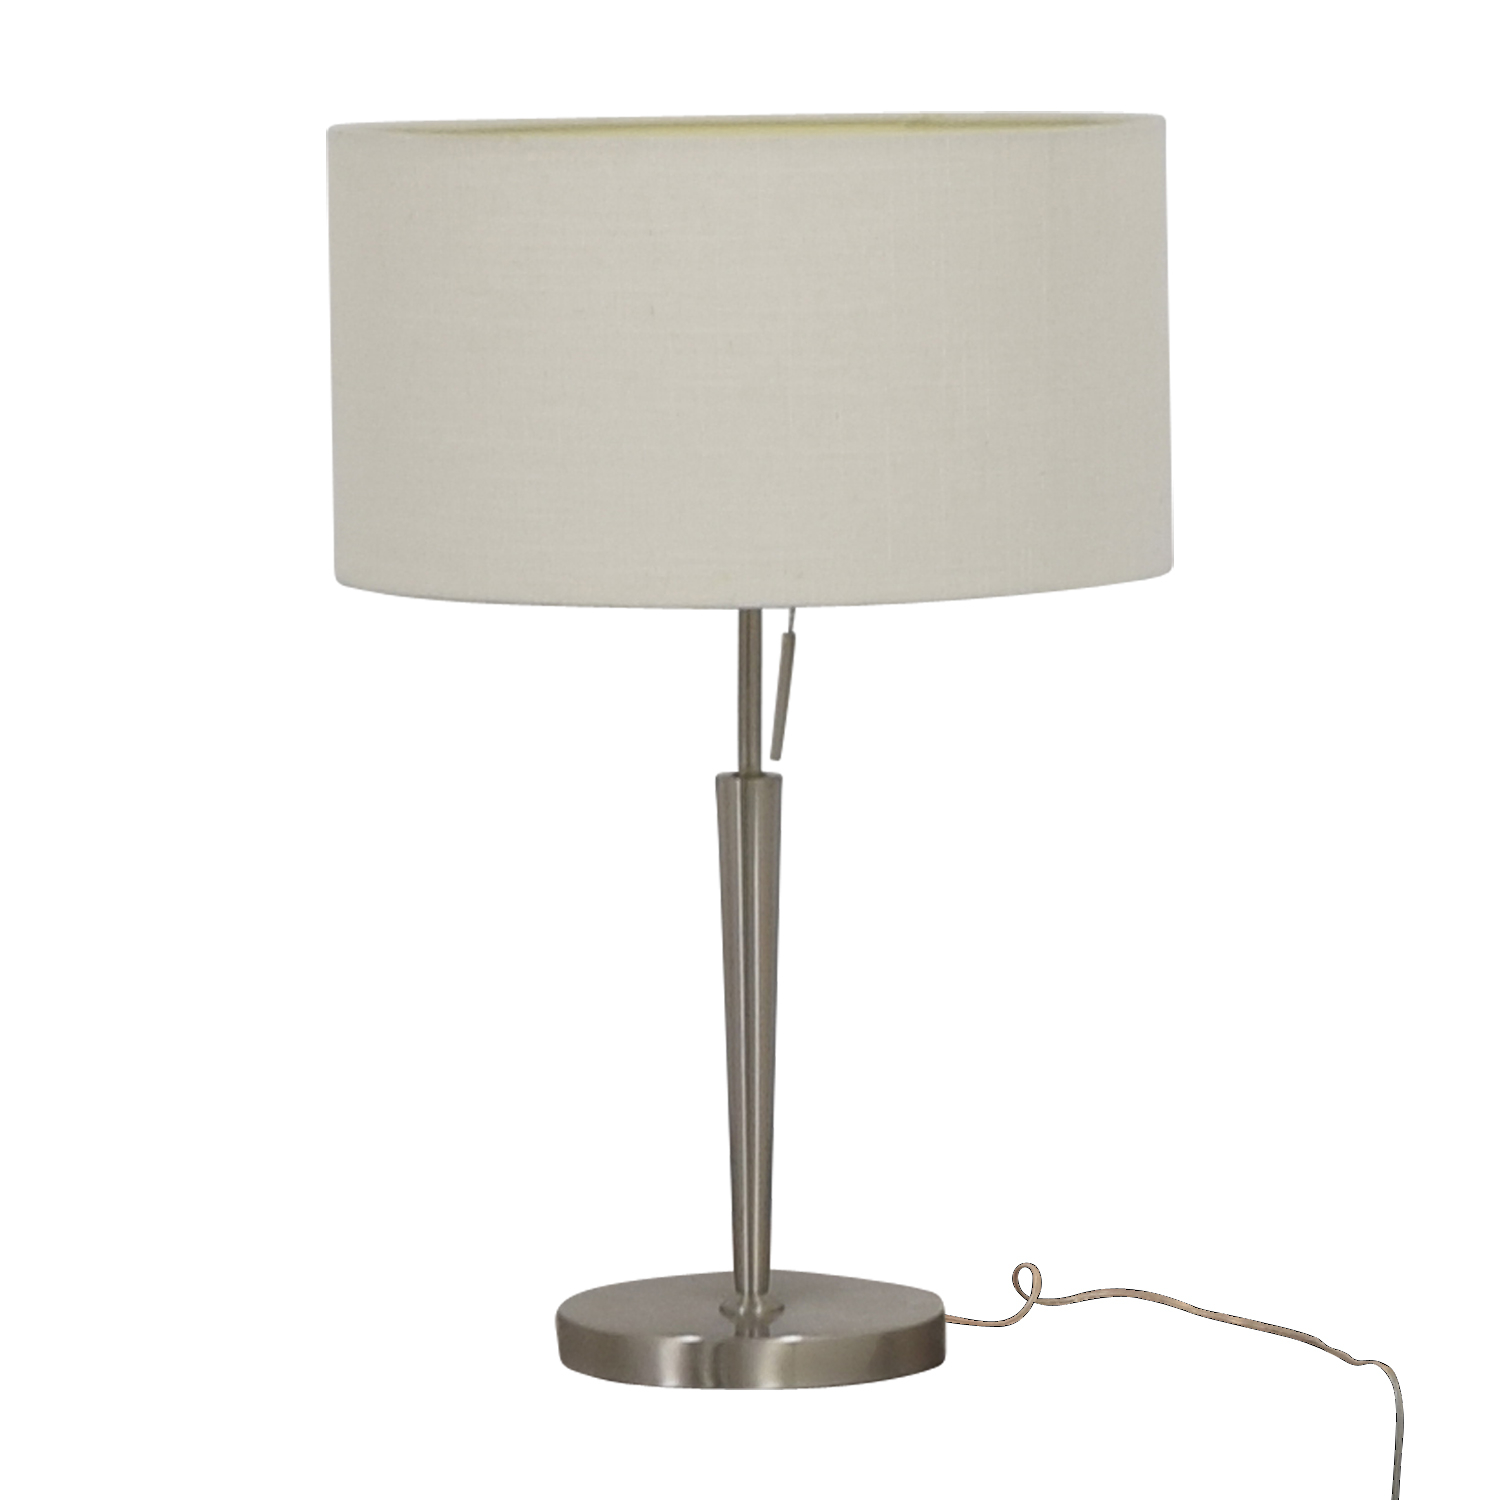 62 Off Arcadia Arcadia Collection Chrome Table Lamp Decor with size 1500 X 1500